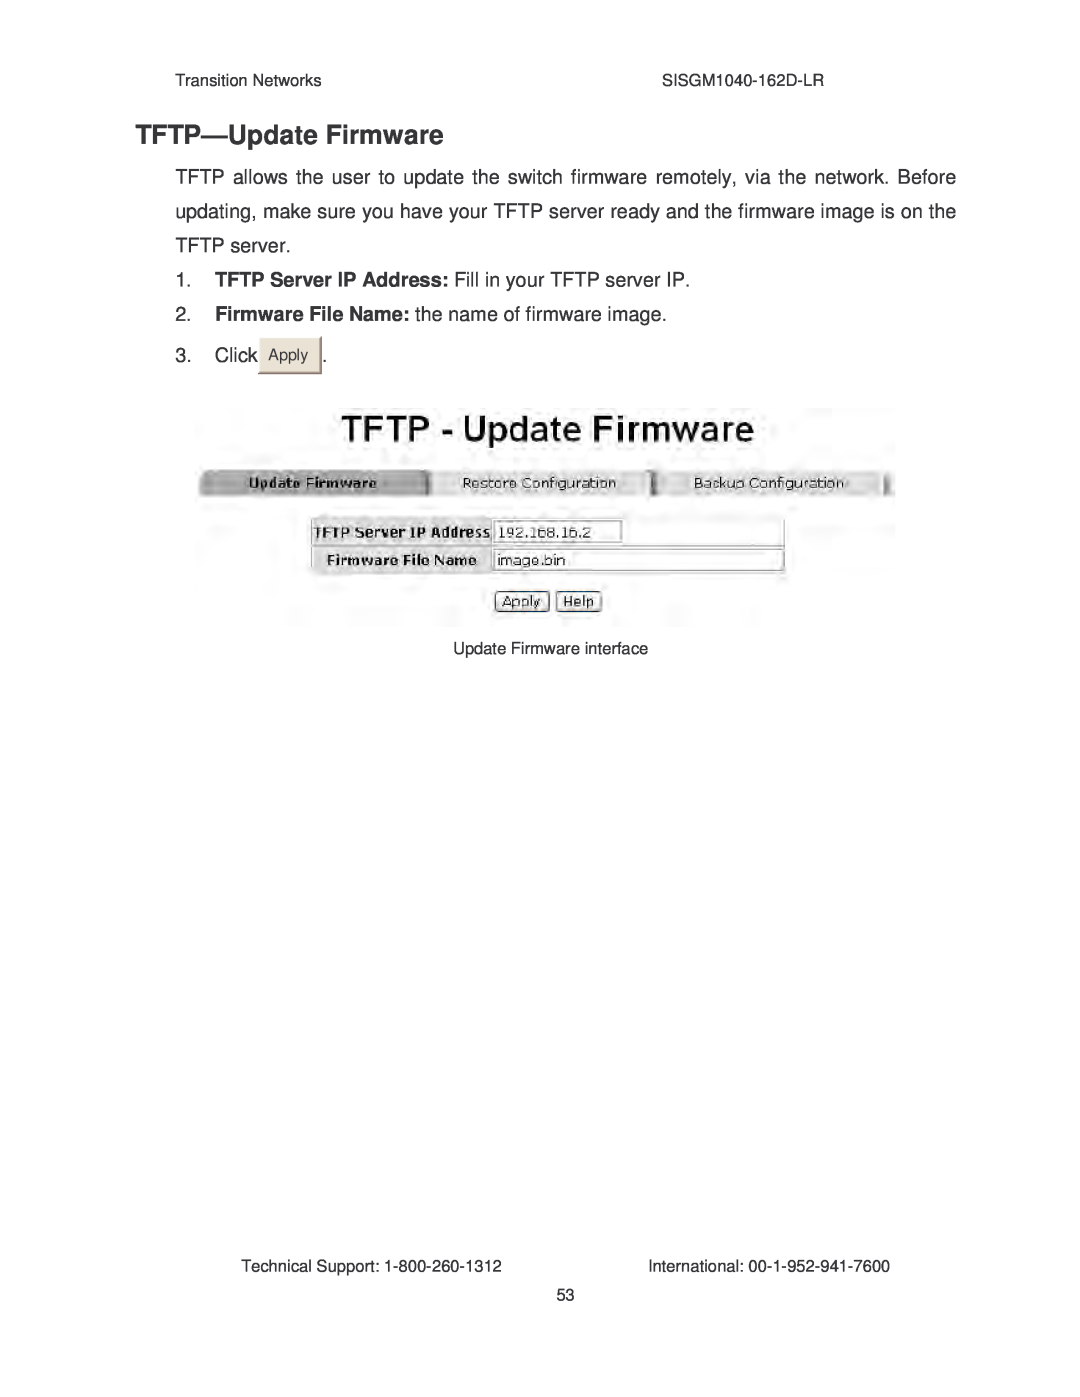 Transition Networks SISGM1040-162D manual TFTP-Update Firmware 